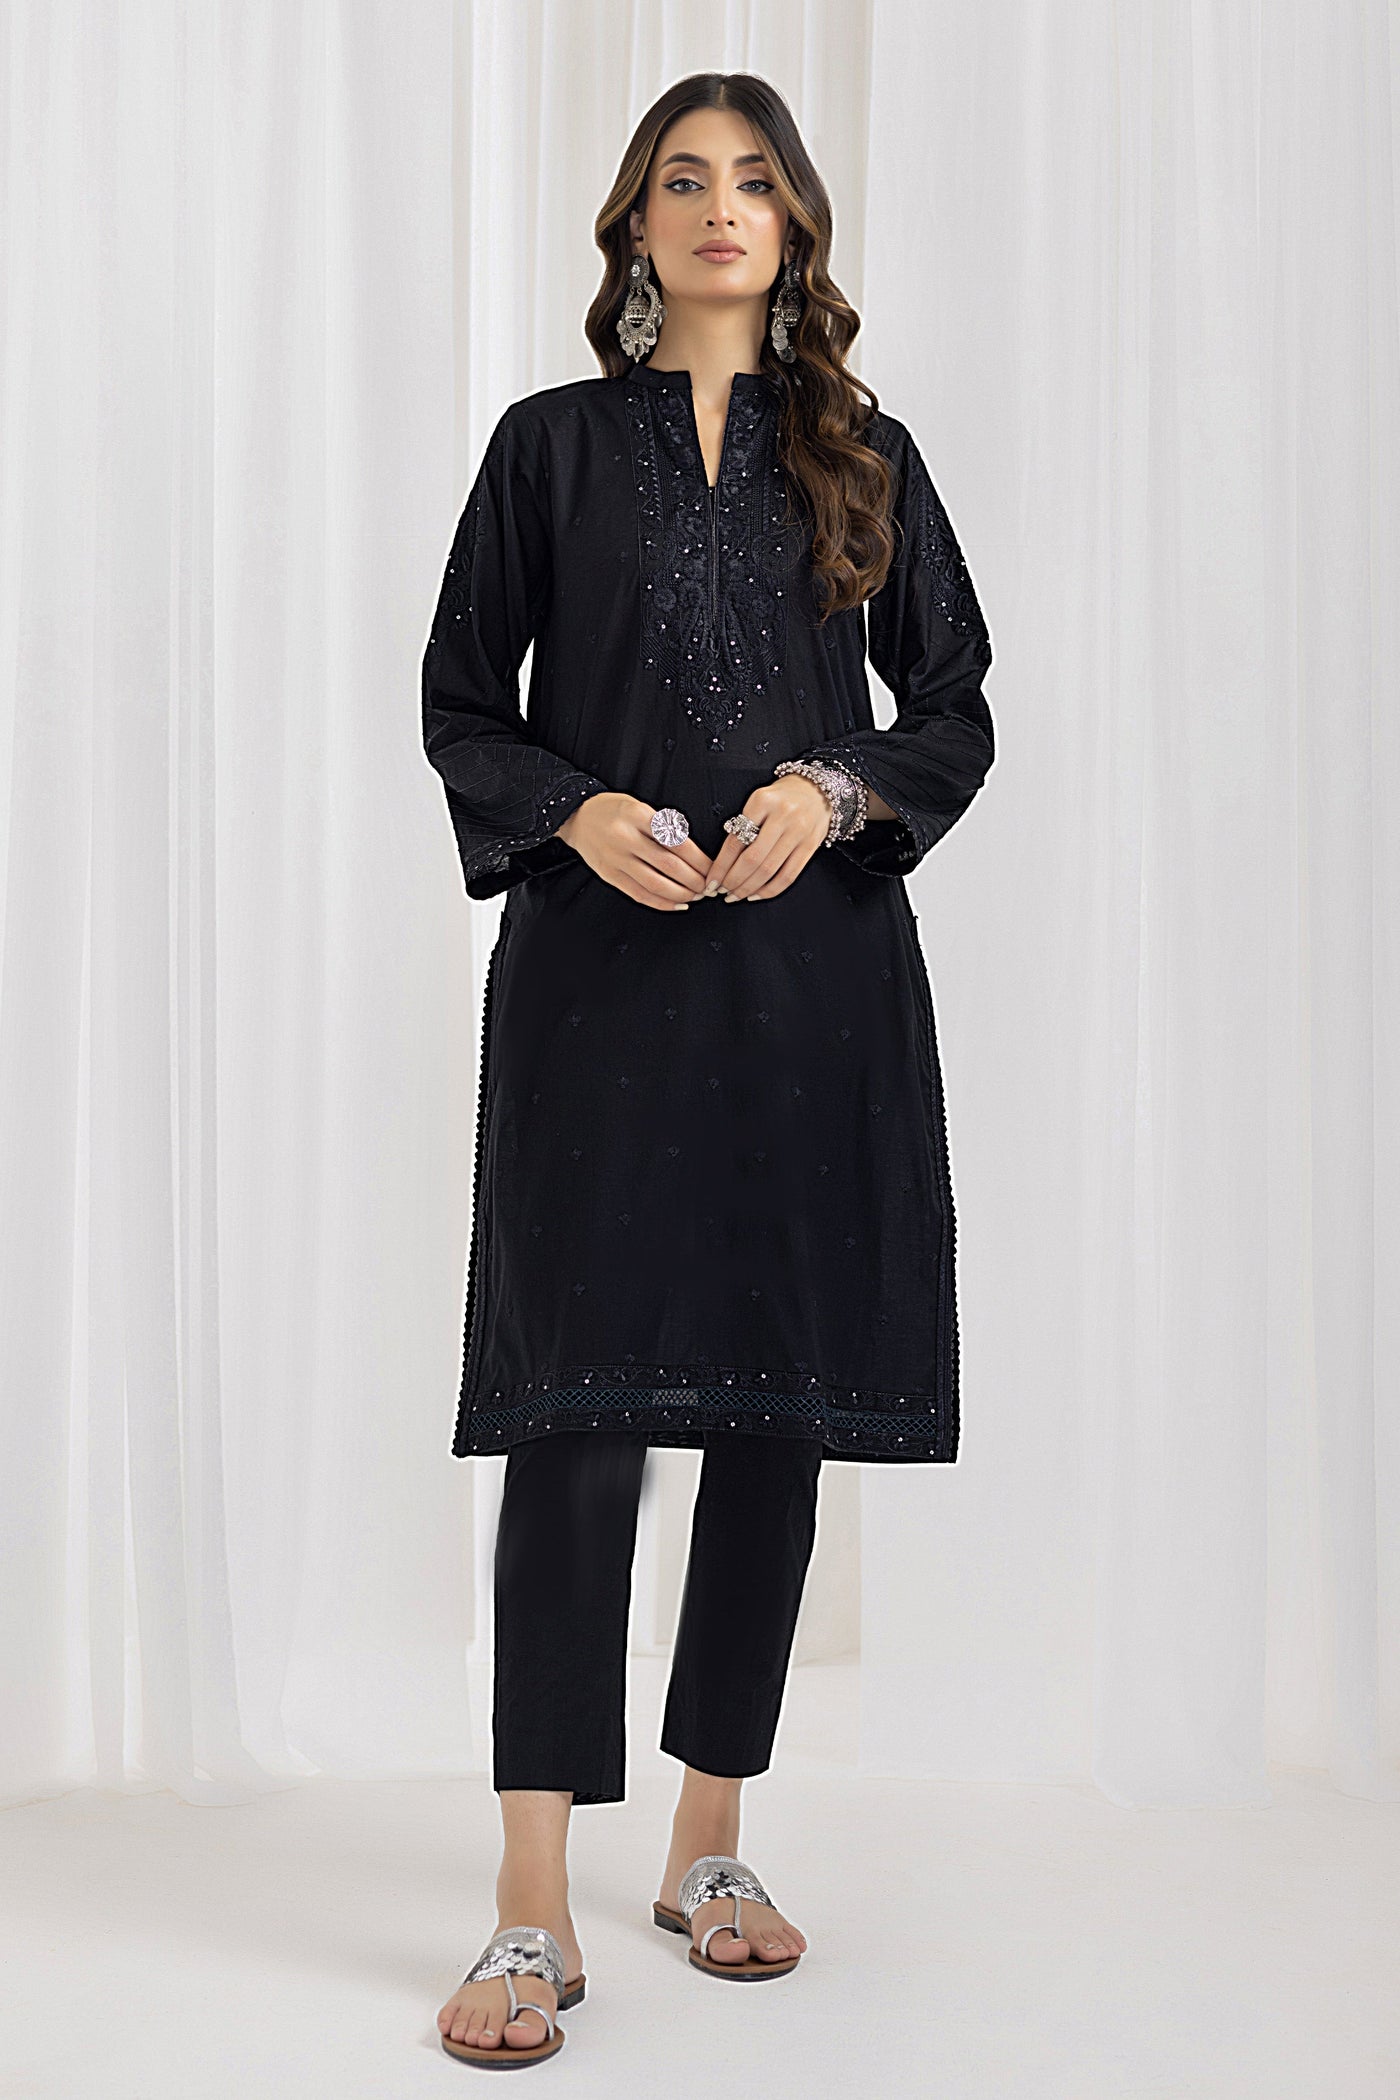 Lakhany 01 Piece Ready to Wear Embroidered Shirt - LG-SR-0128